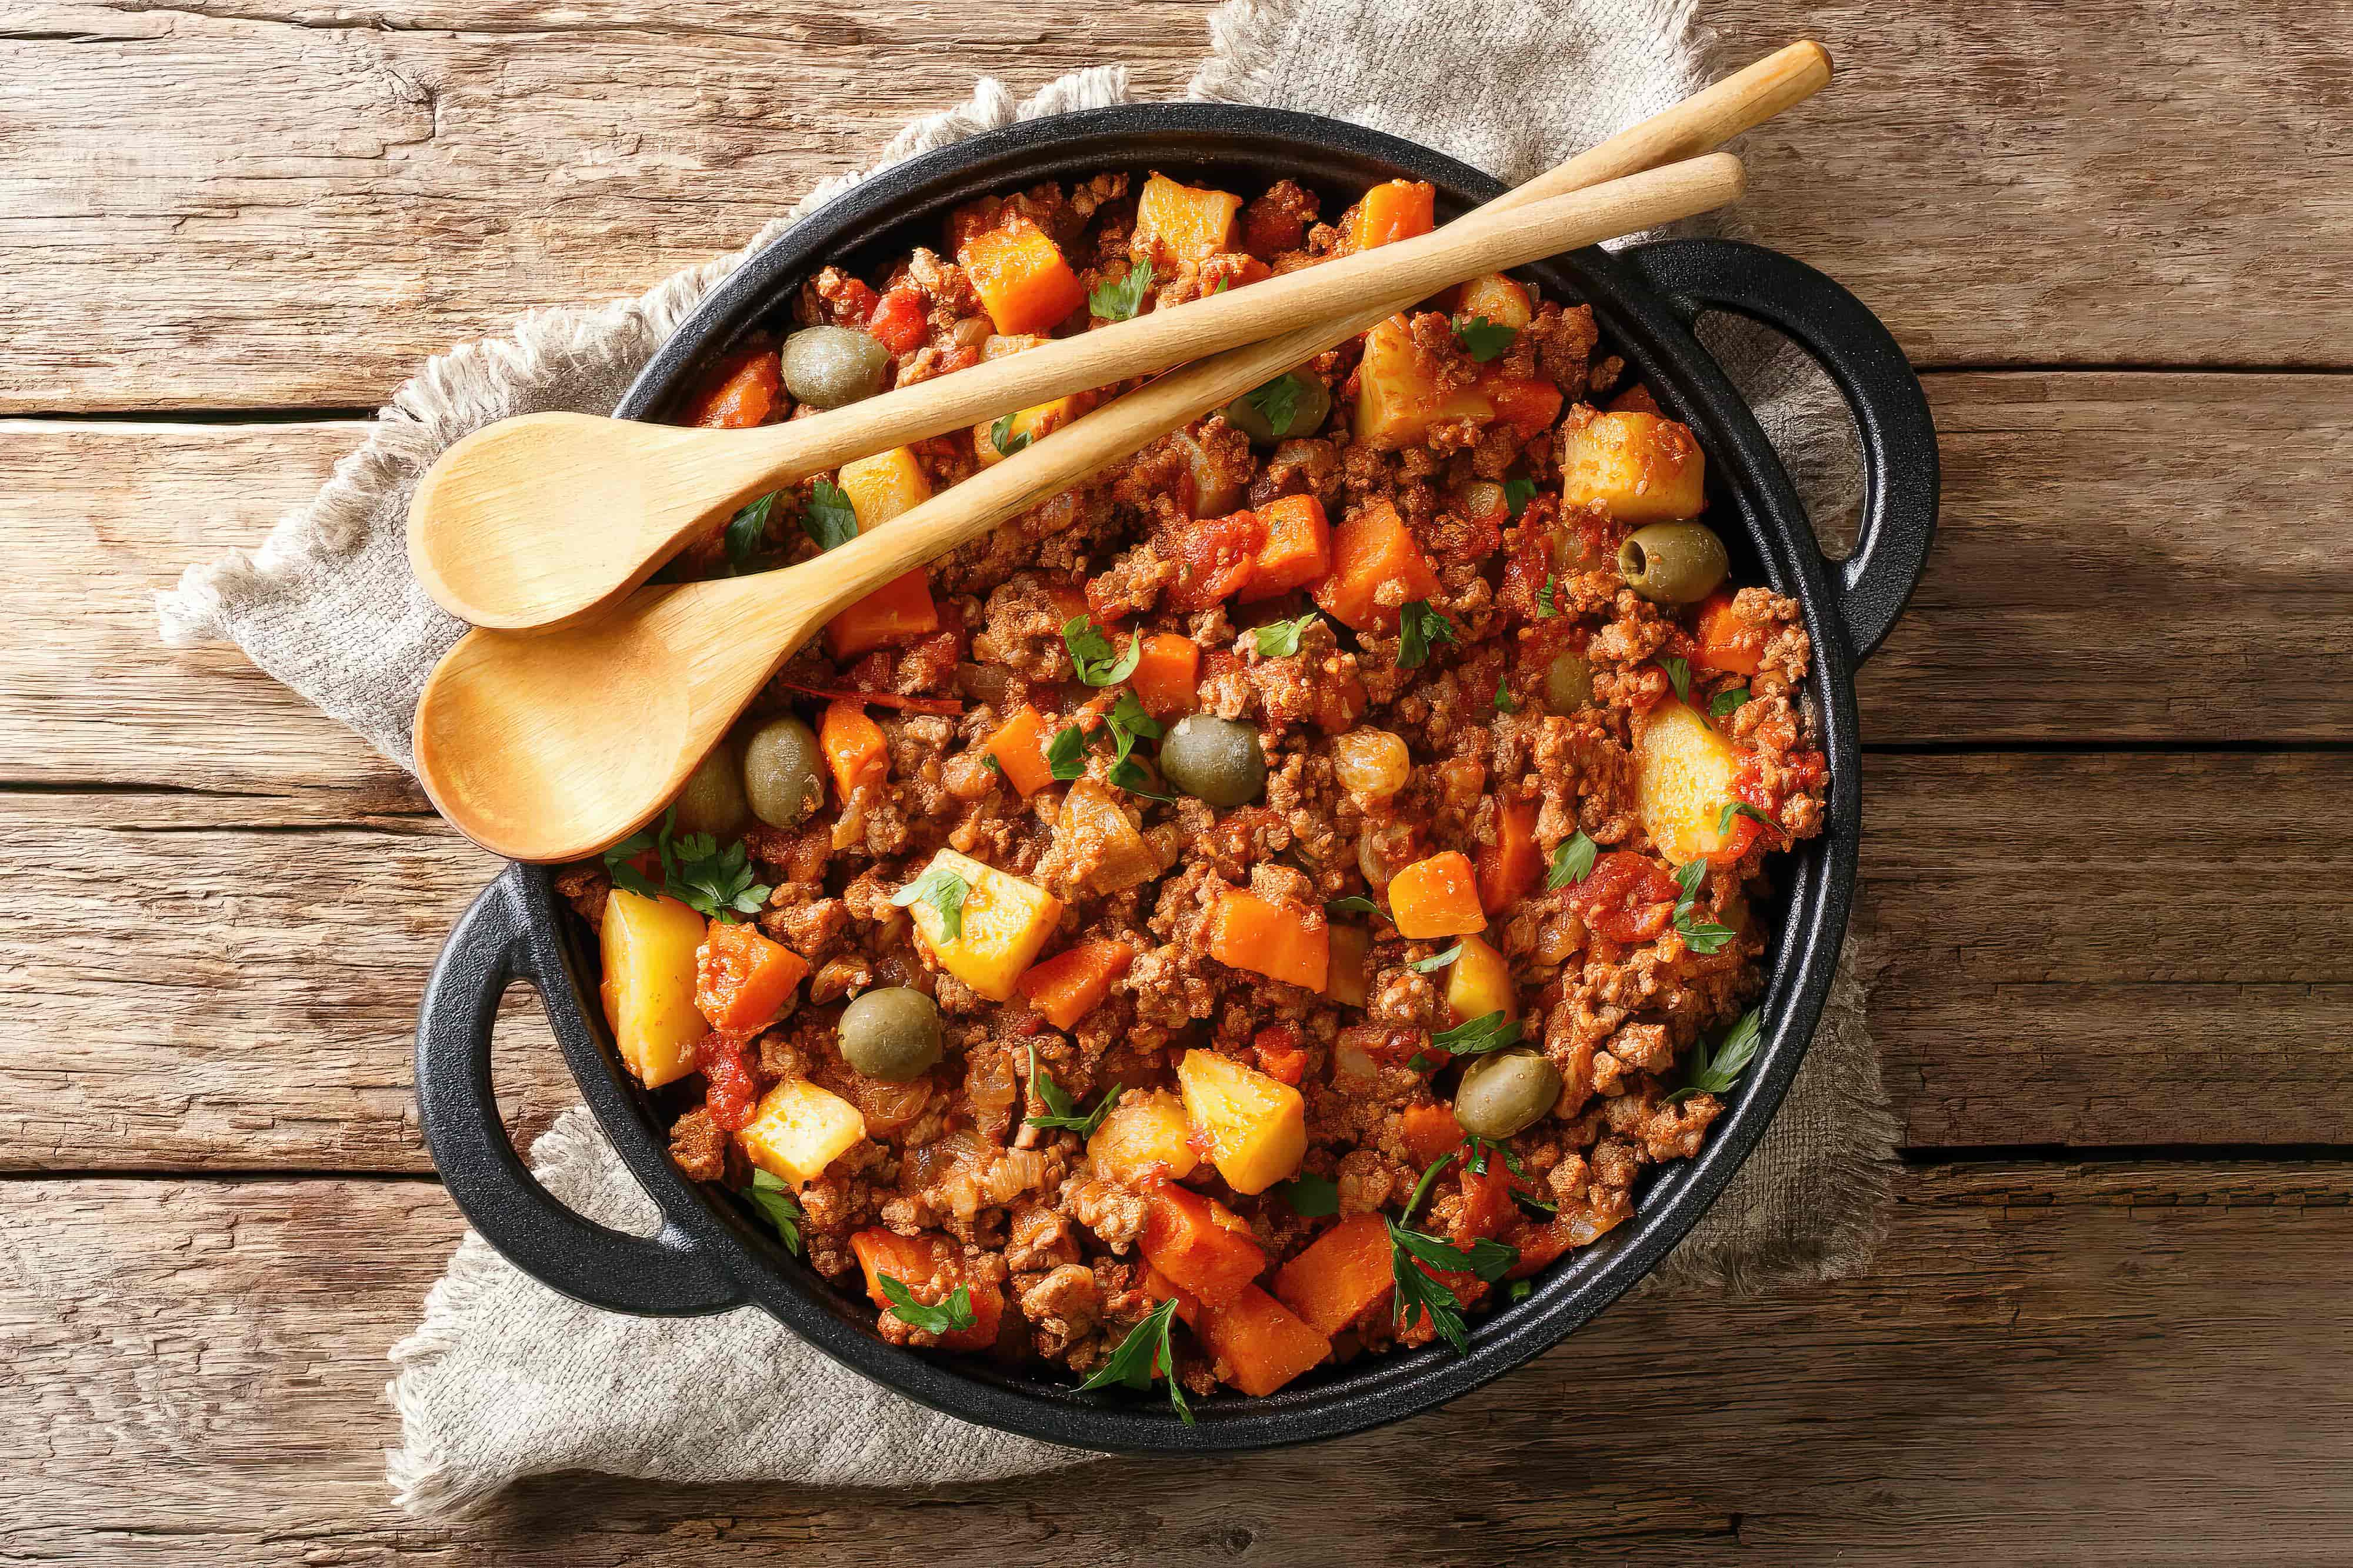 Delicious Picadillo cooked from ground beef with vegetables, raisins and spices close-up in a frying pan